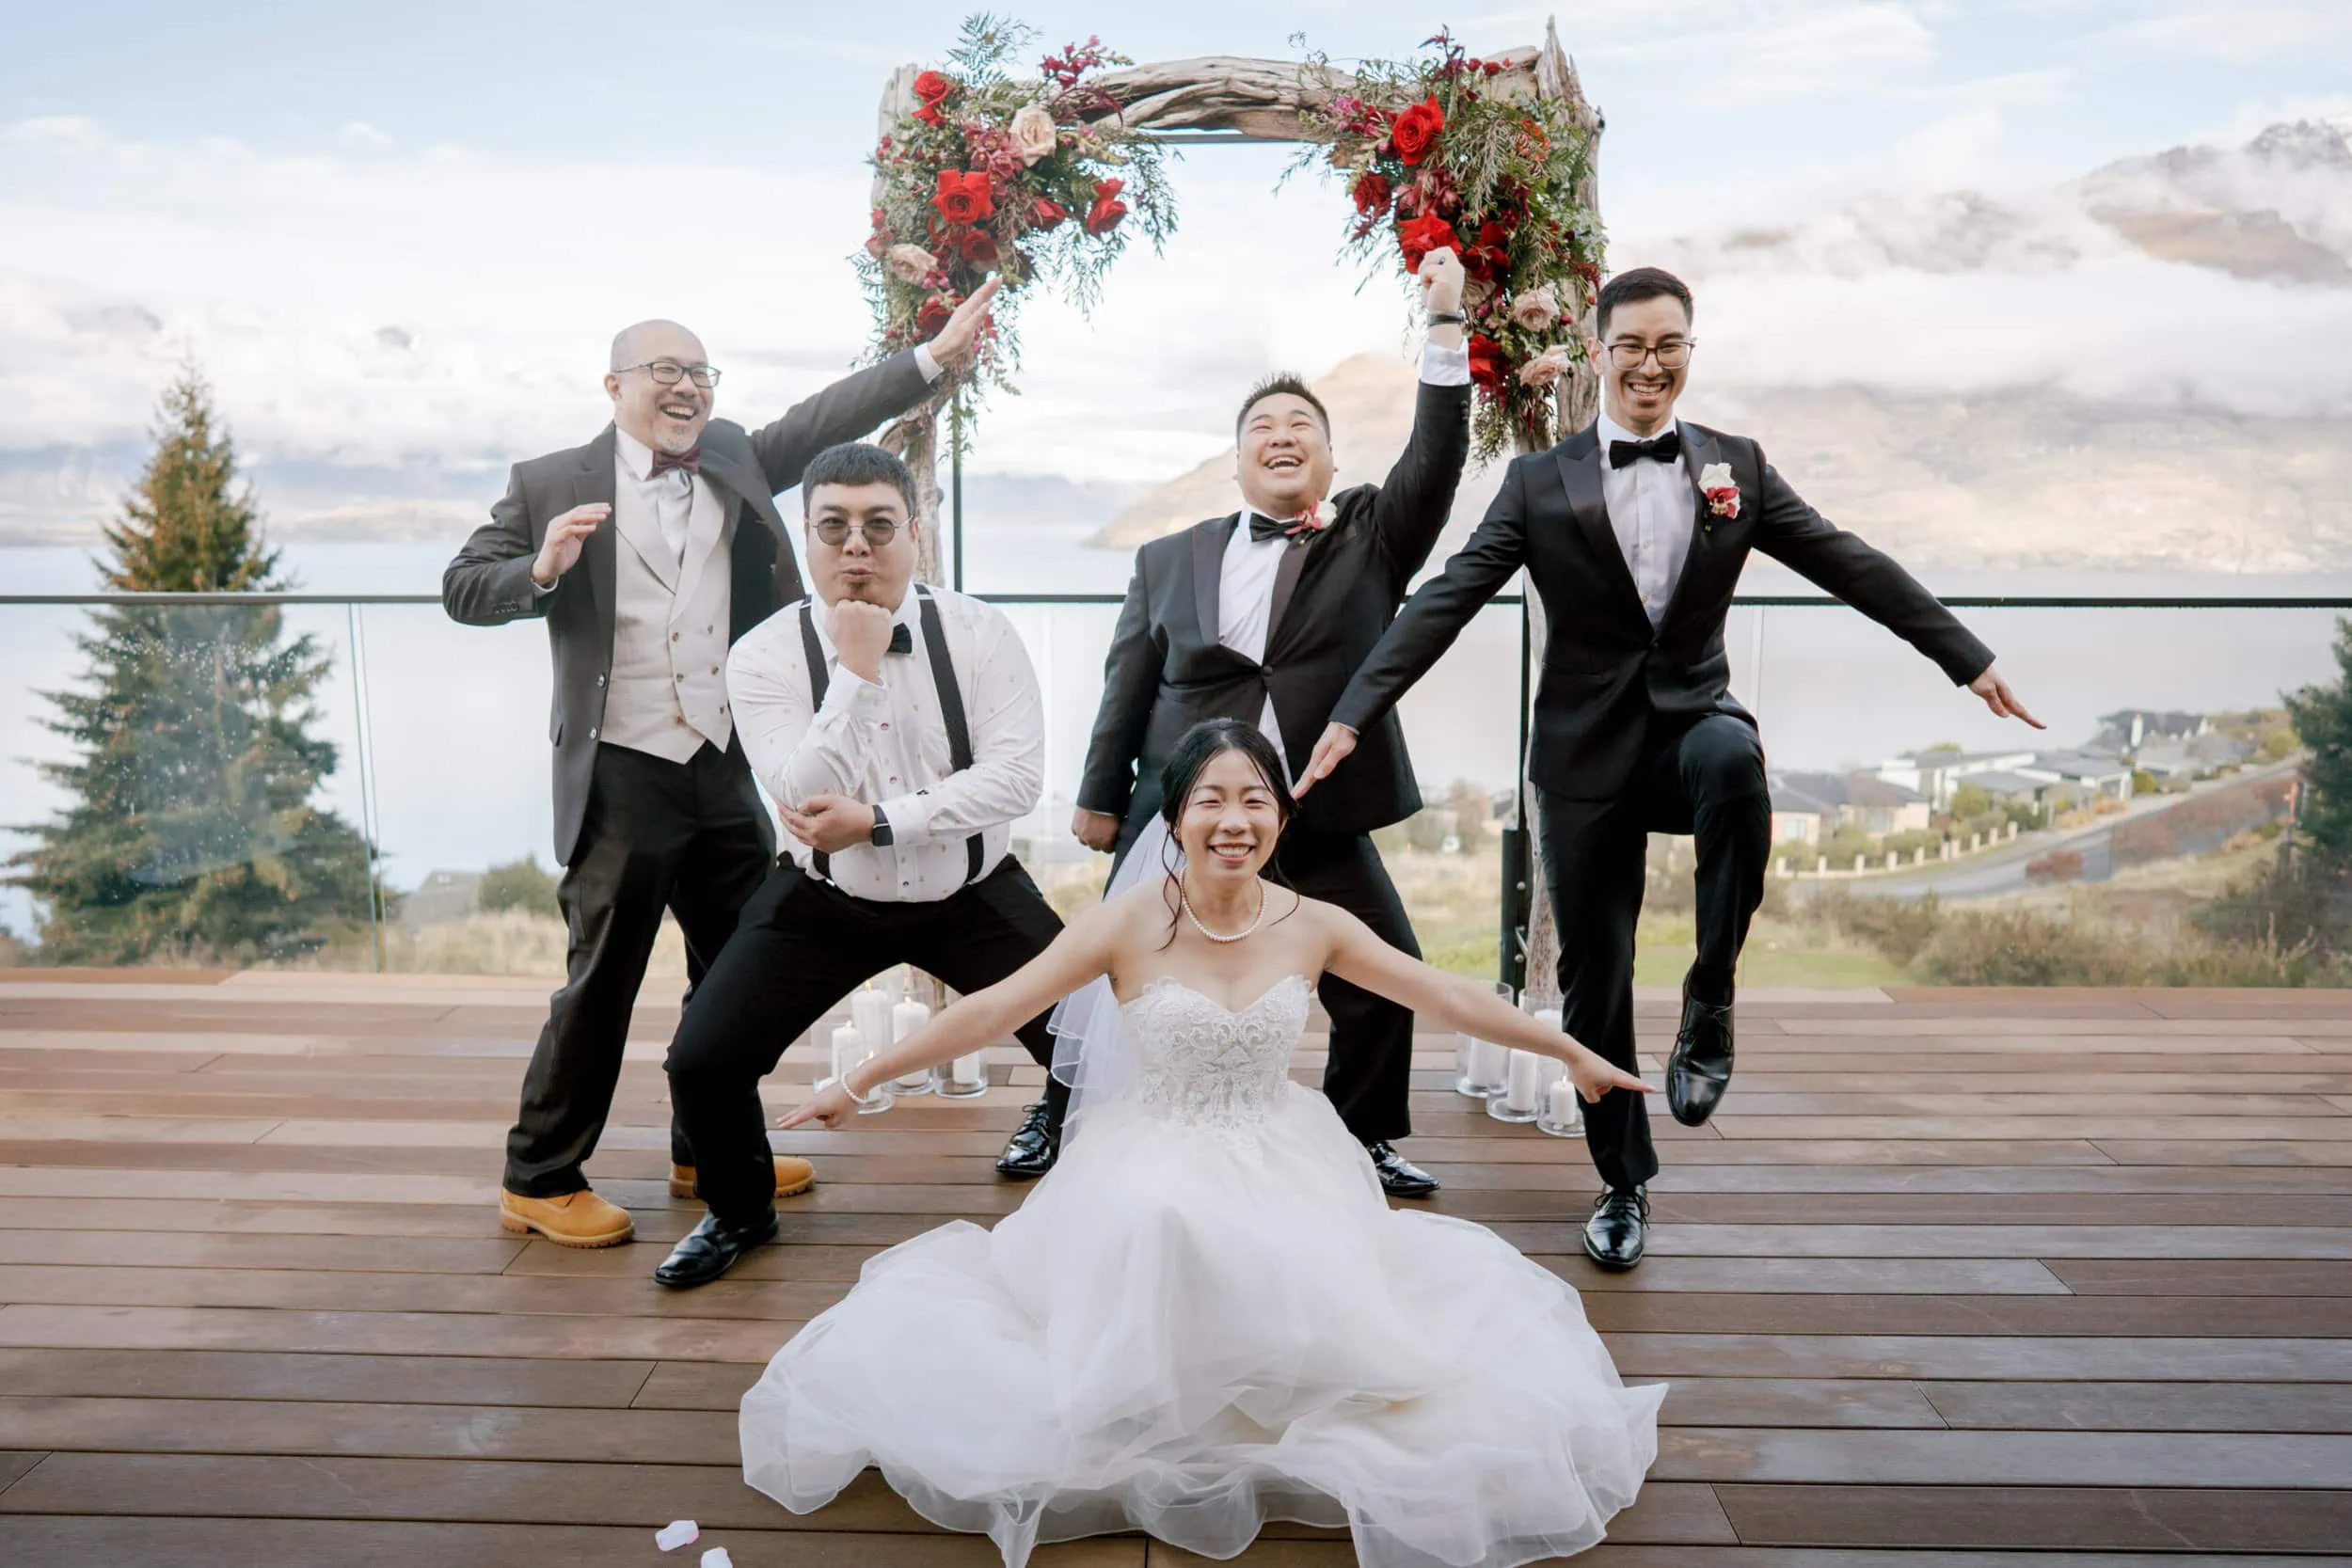 Queenstown New Zealand Elopement Wedding Photographer - A group of bridesmaids and groomsmen pose for a wedding photo at Lam and Wendy's Kamana Lakehouse Wedding.